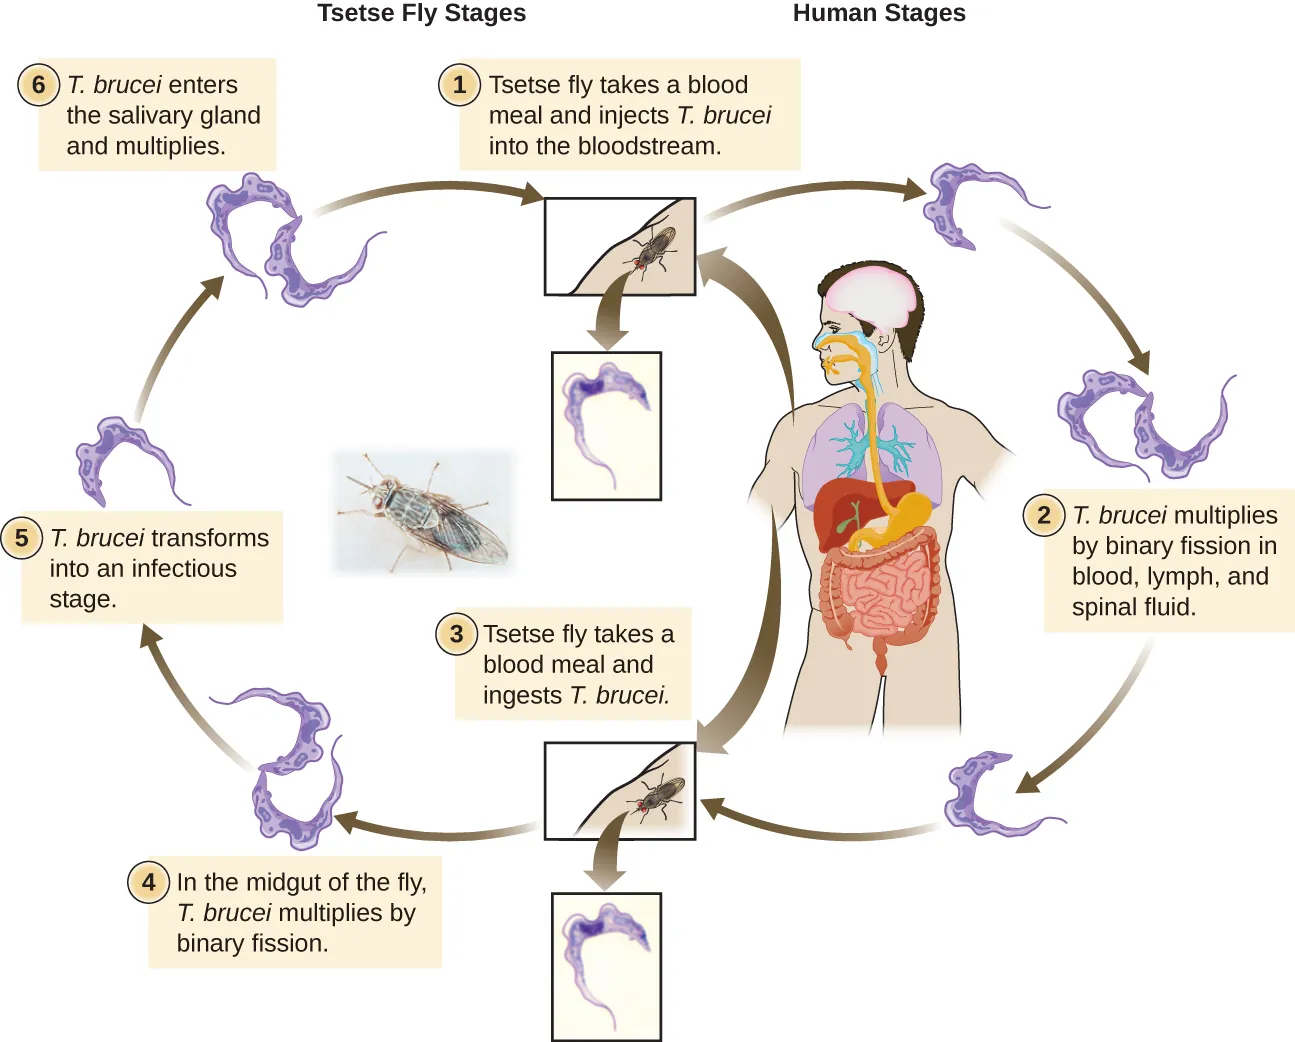 The life cycle of Trypanosoma brucei takes place in both tsetse fly and humans. When the tsetse fly takes a blood meal it inject T. brucei into the bloodstream of a human. There the T. brucei multiplies by binary fission in blood, lymph, and spinal fluid. When another tsetse fly takes a blood meal it ingests T. brucei which multiplies by binary fission in the midgut of the fly. The T. brucei then transforms into an infectious stage which enters the salivary glands and multiplies. This can then be spread to another human.